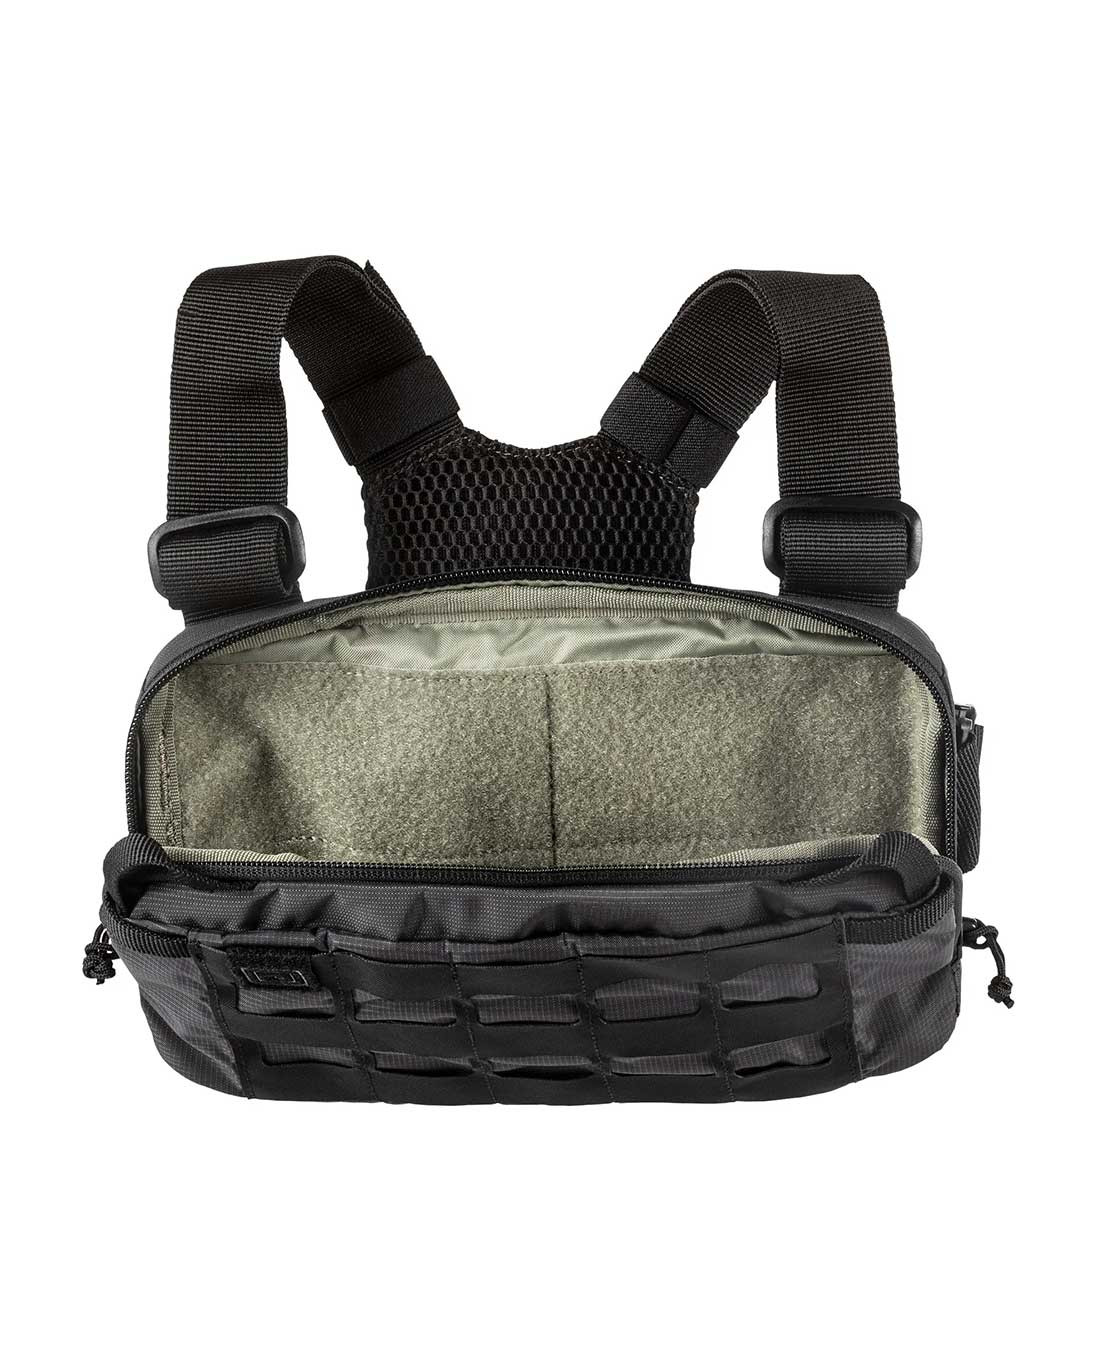 5.11 Tactical Skyweight Survival Chest Pack Volcanic - 56769ABR.098 - TACWRK